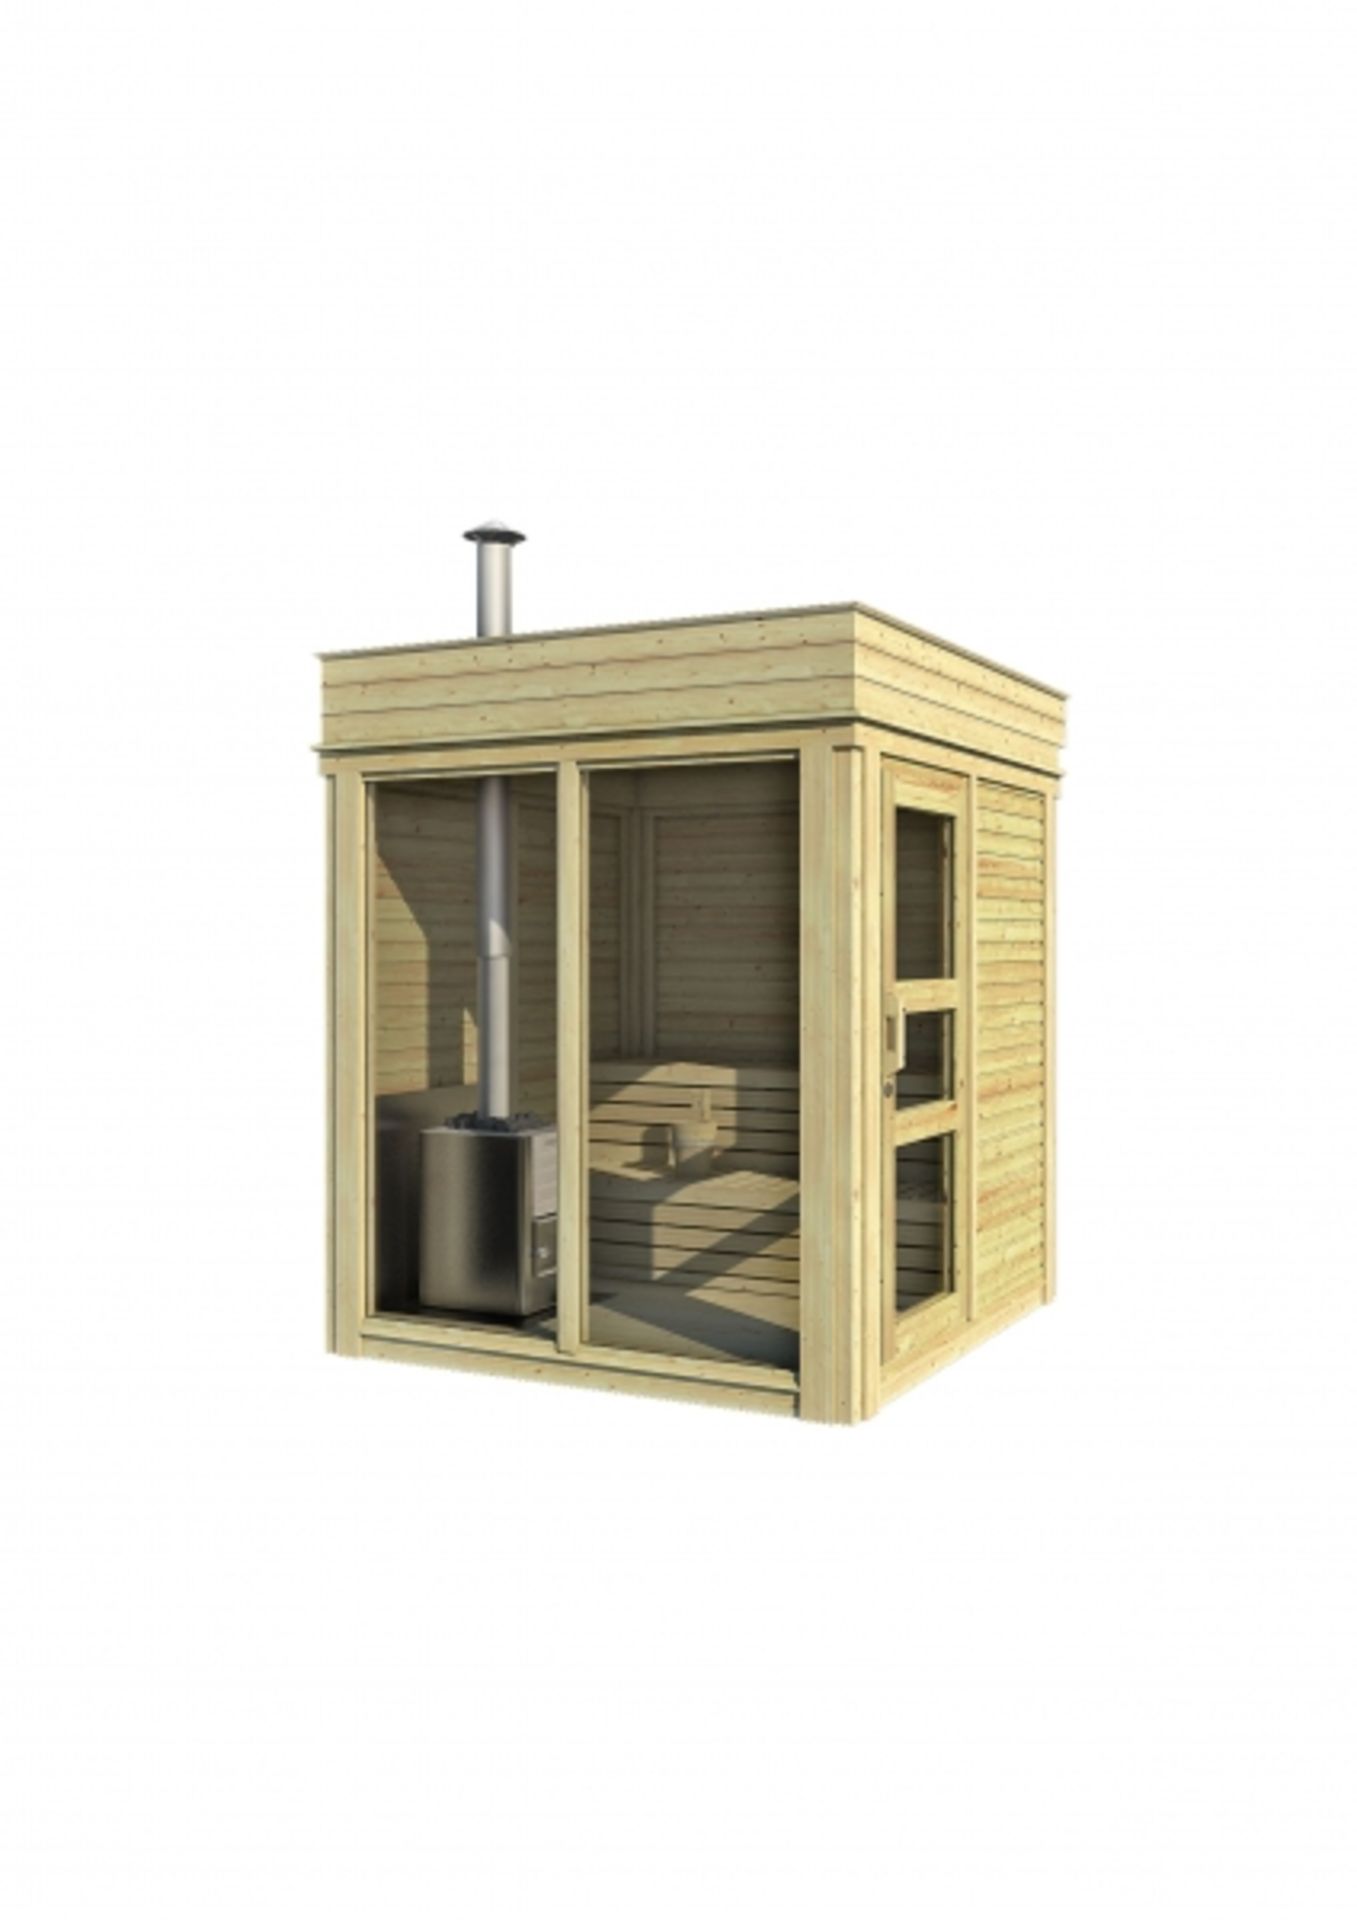 V Brand New 2 x 2m Sauna Cube - Made From Spruce Wood - Roof Covered With Black Bitumen Weld